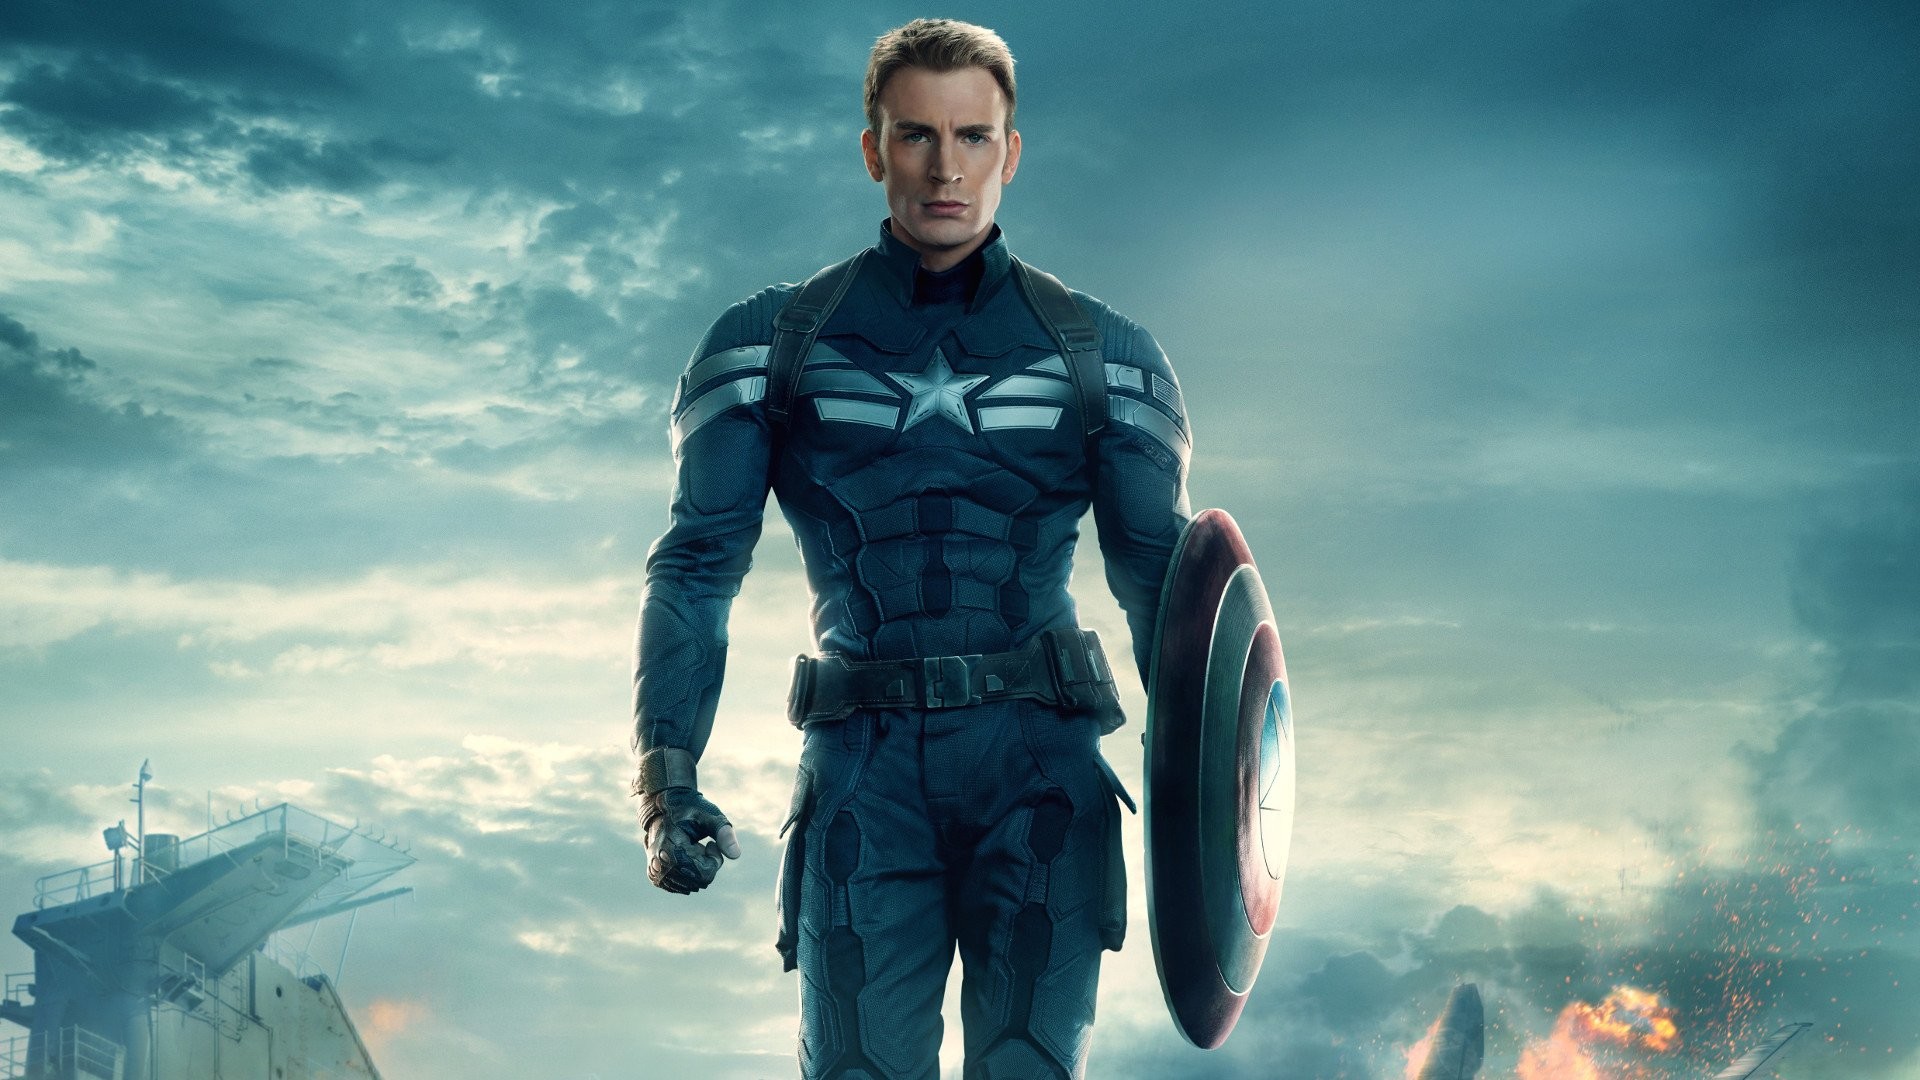 Captain America Wallpapers 1920x1080 74 Images